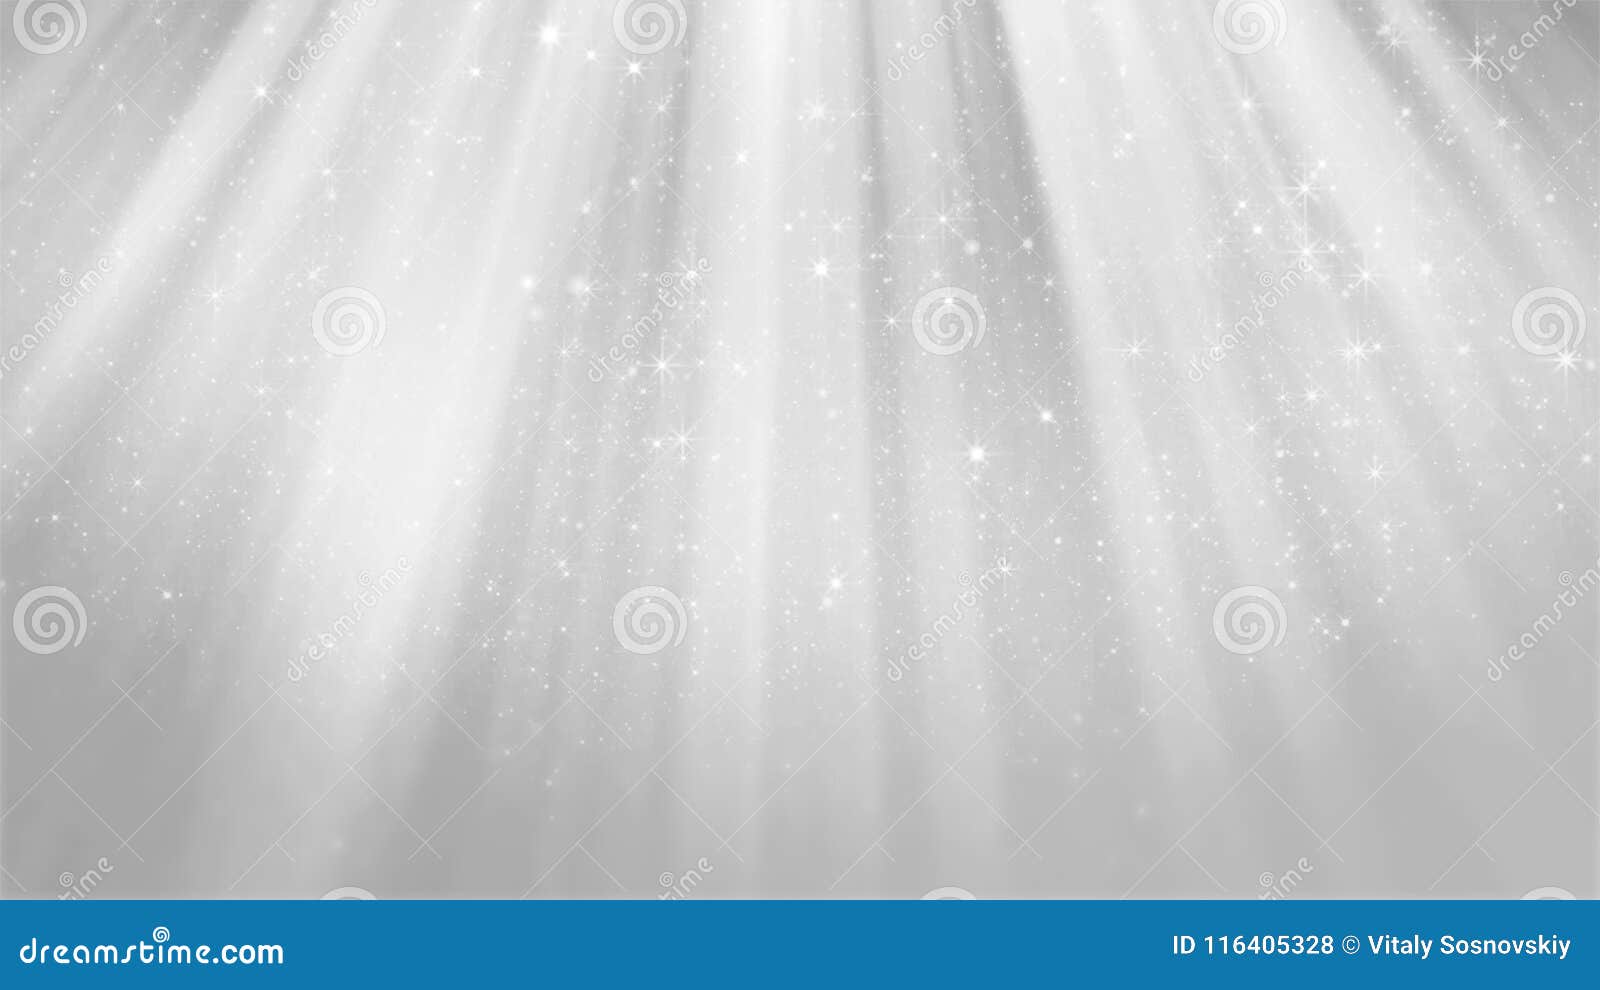 3D Rendering Of Abstract Shiny Silver Background Stock Illustration